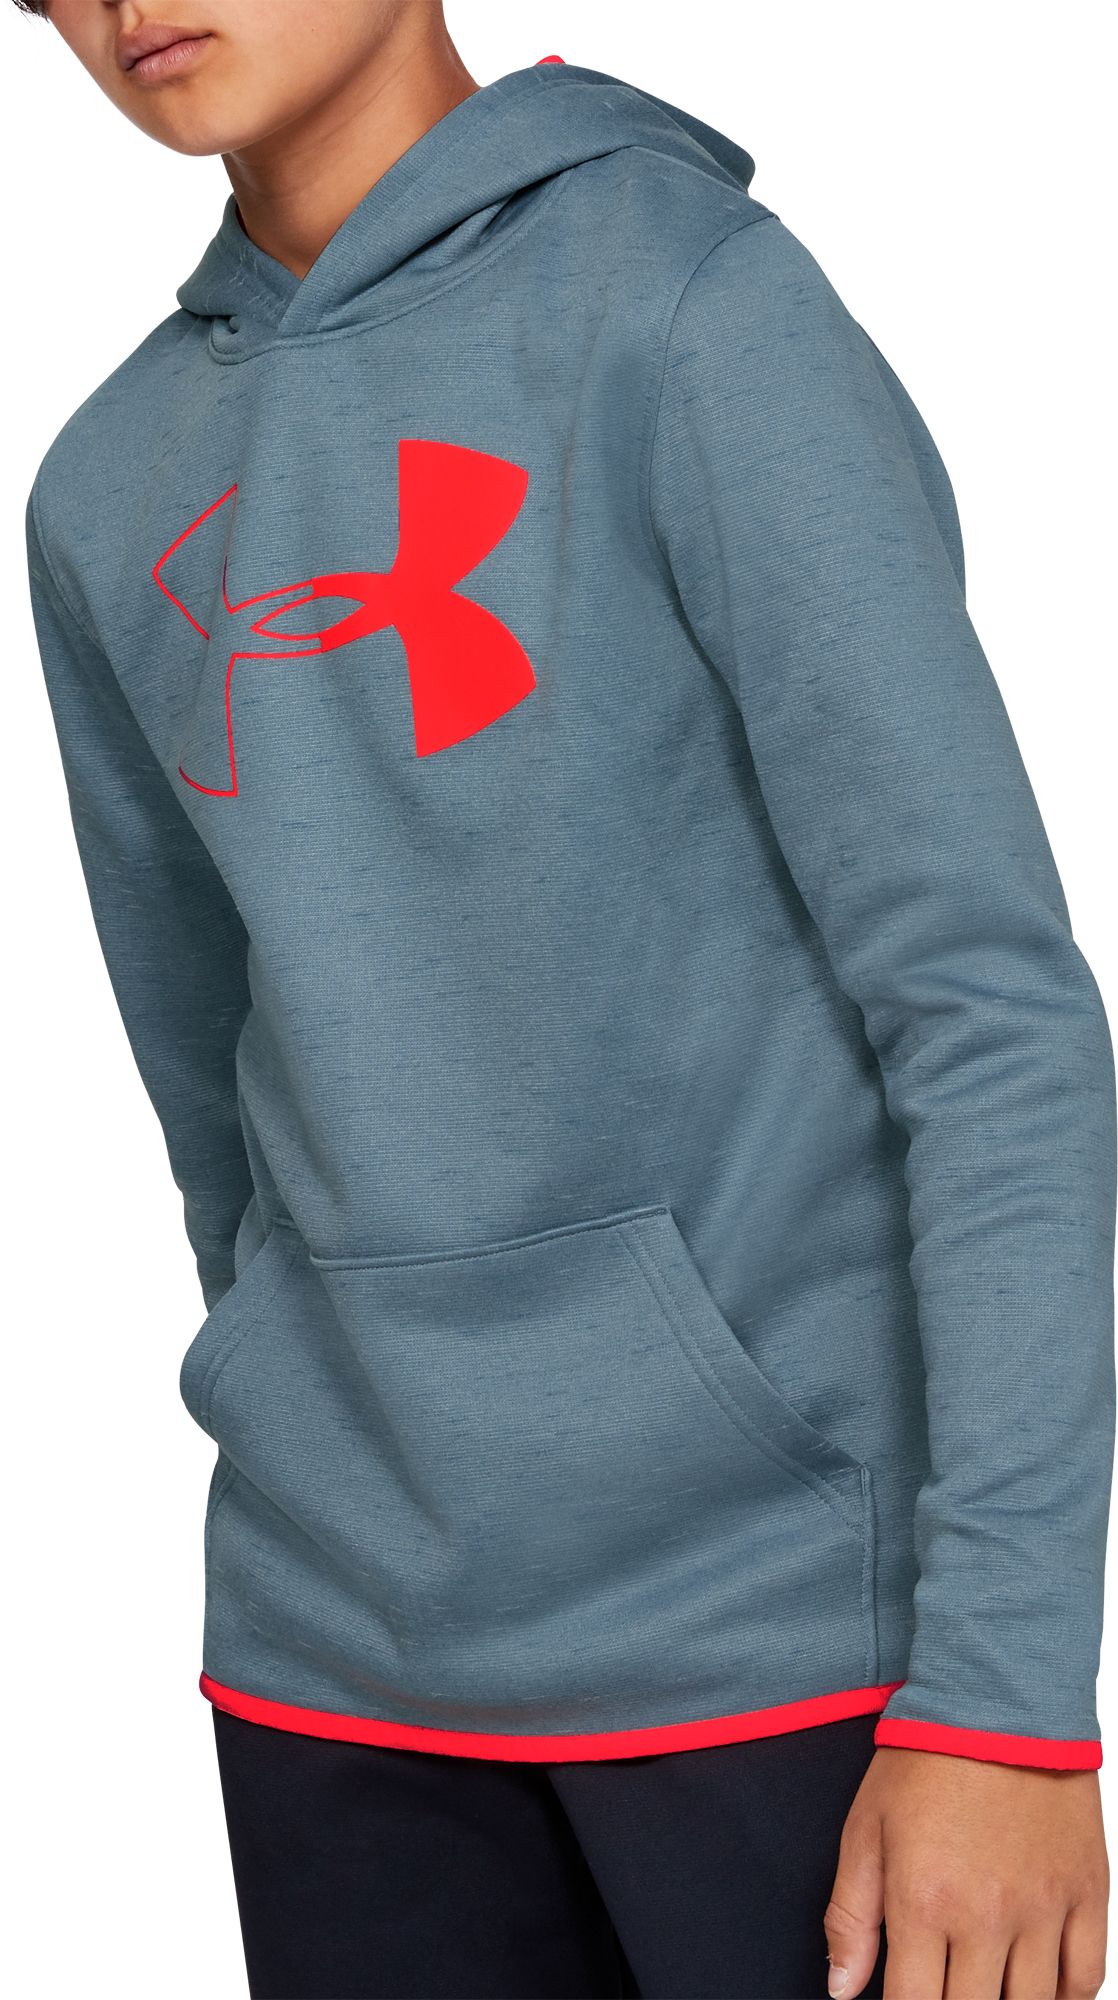 youth xl under armour hoodie